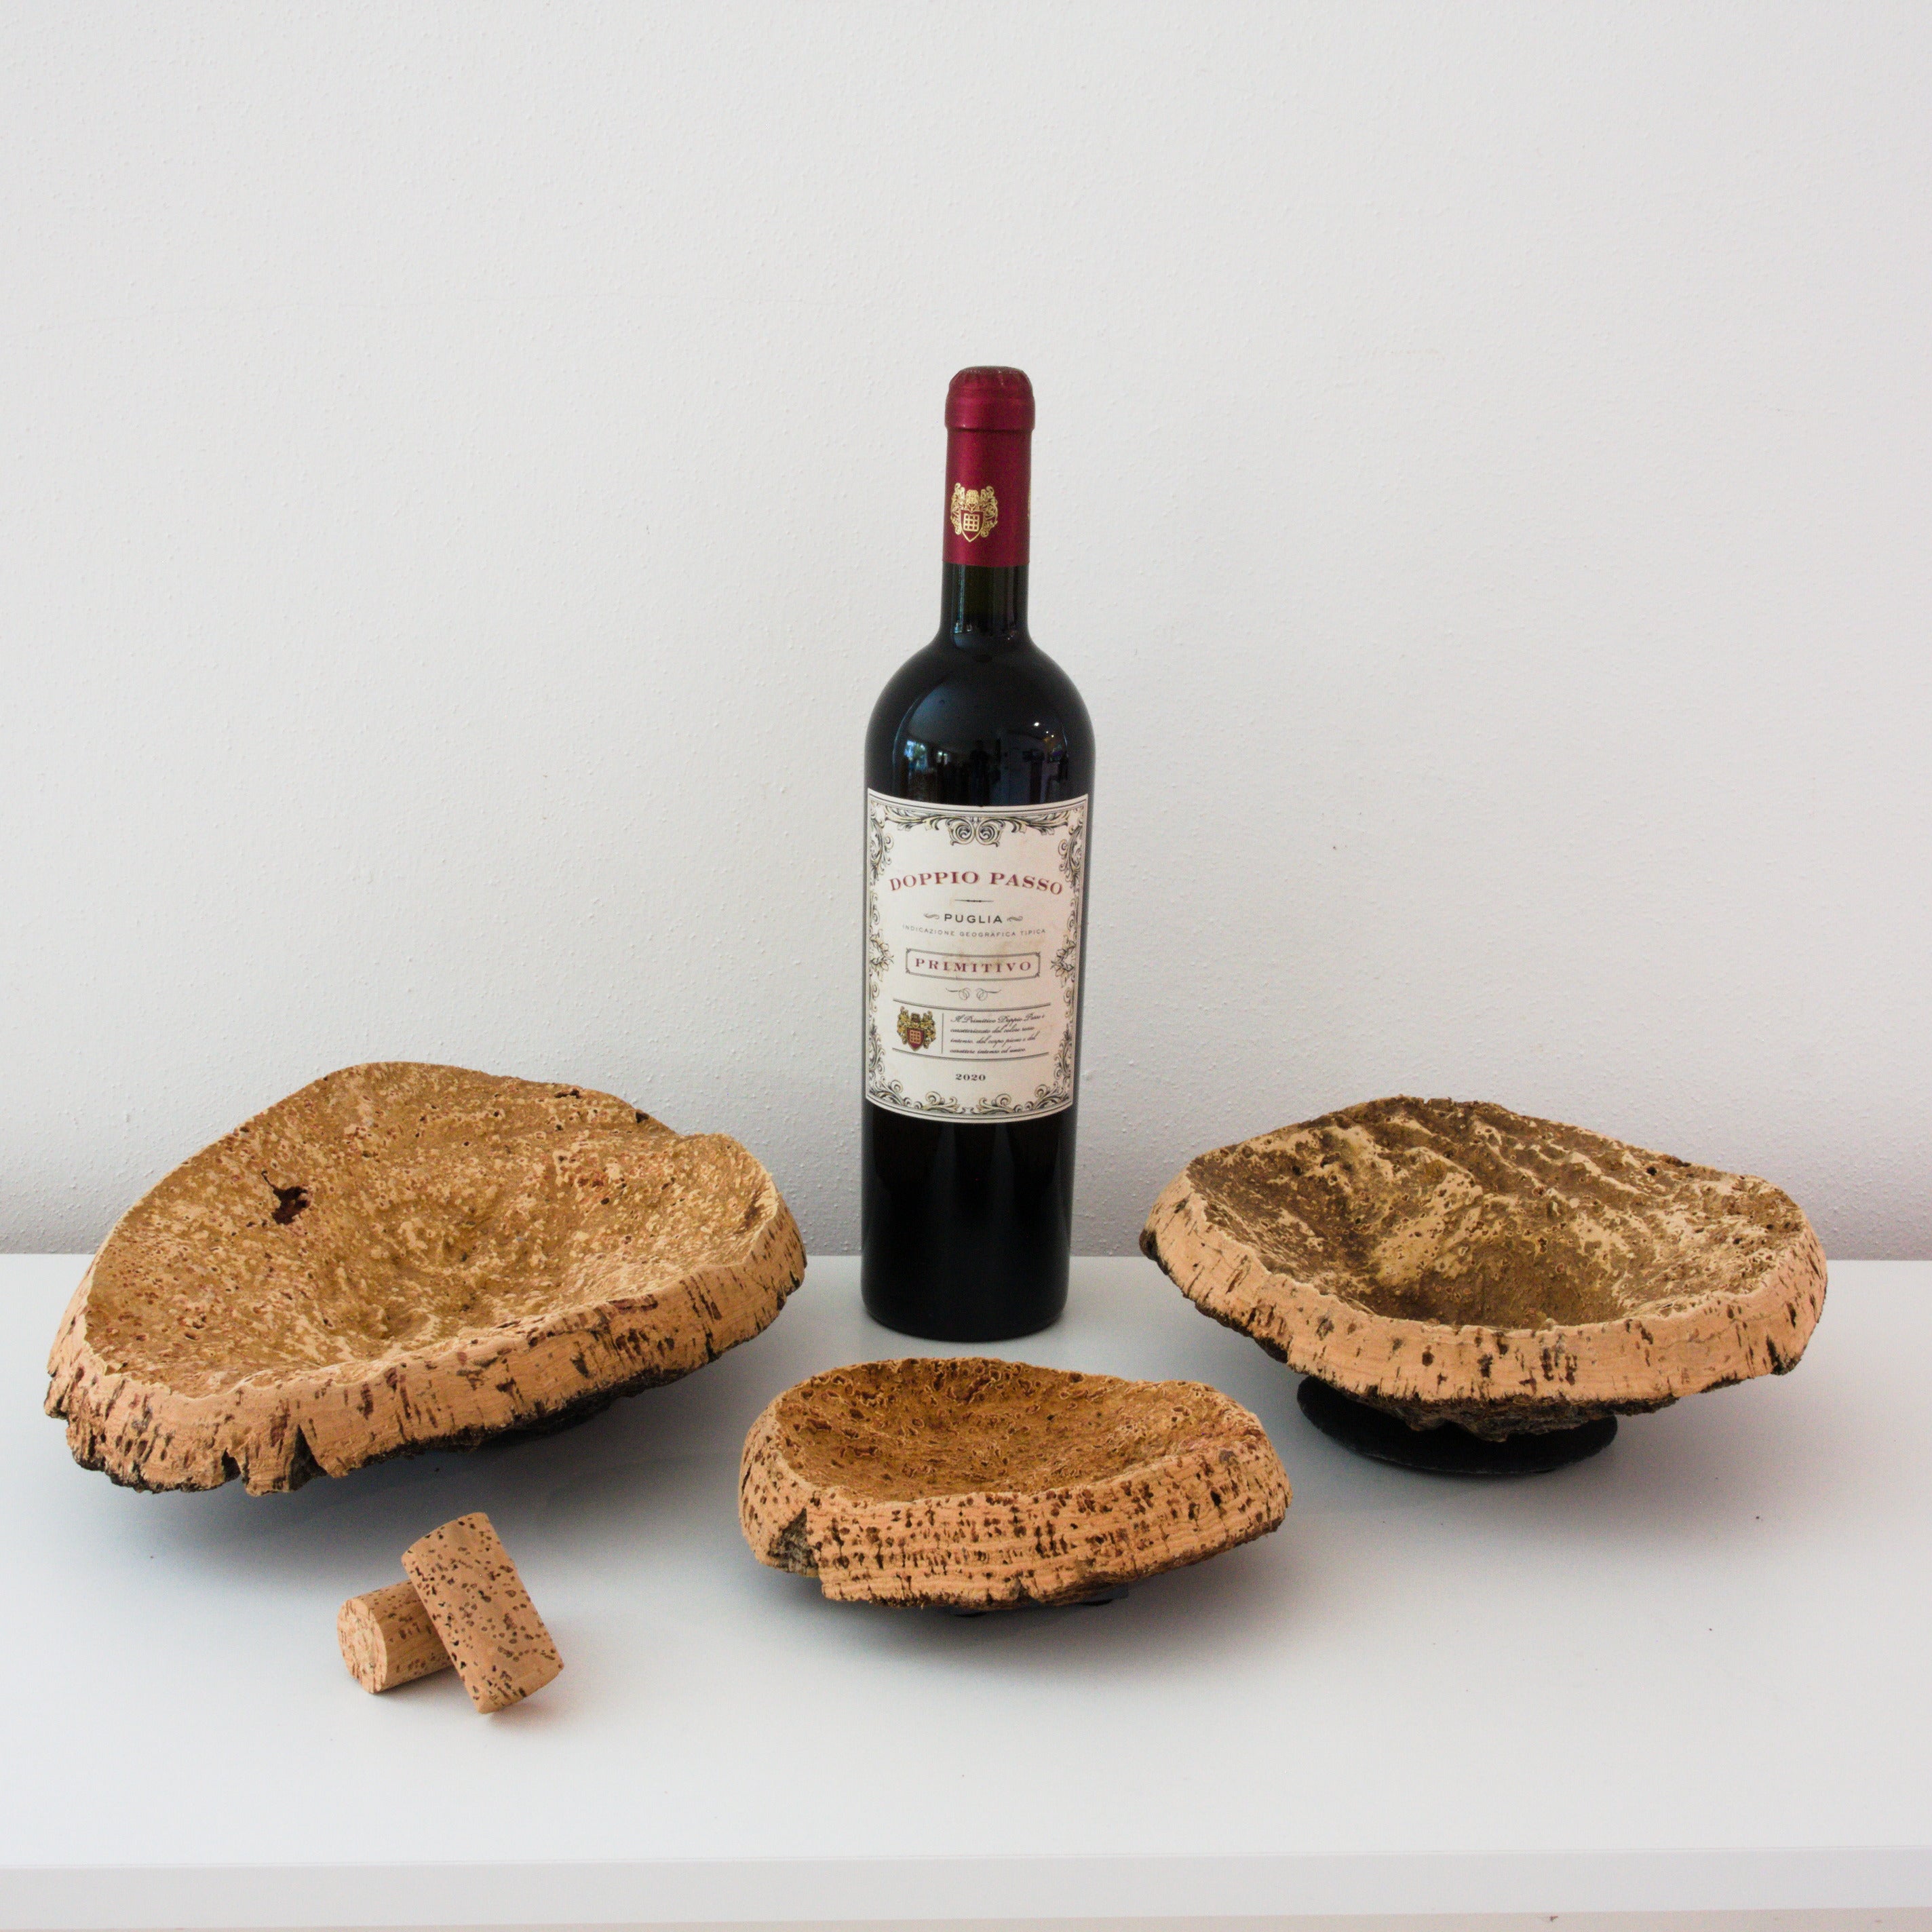 TOP gift idea * VERKORKst premium cork bowl * SPECIAL OFFER from EUR 25.00 * unique * fireproof, water-repellent, handmade, sustainable